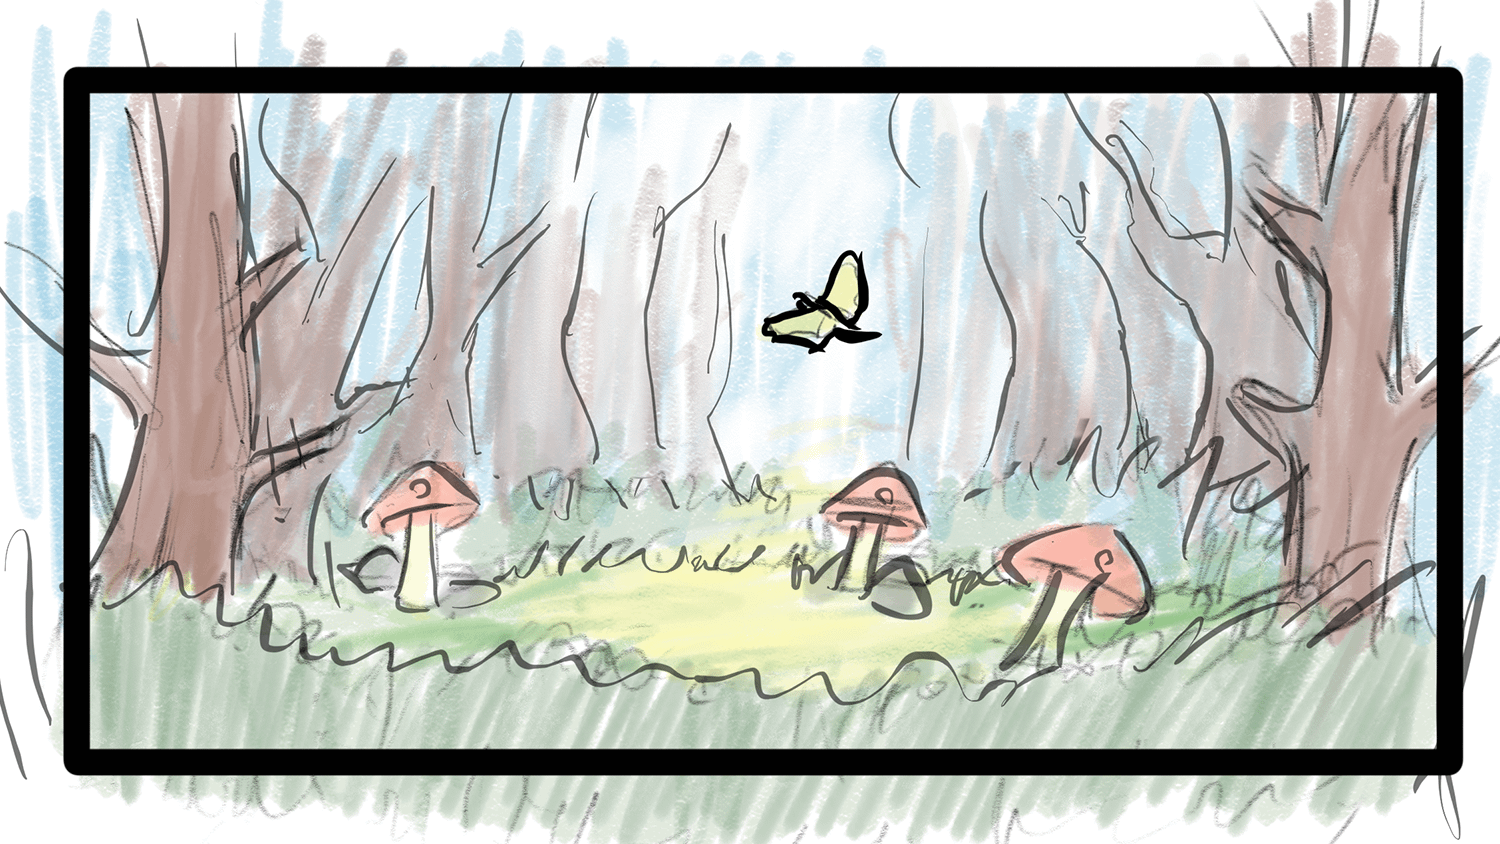 Low-fidelity sketch of forest environment with mushrooms and butterflies